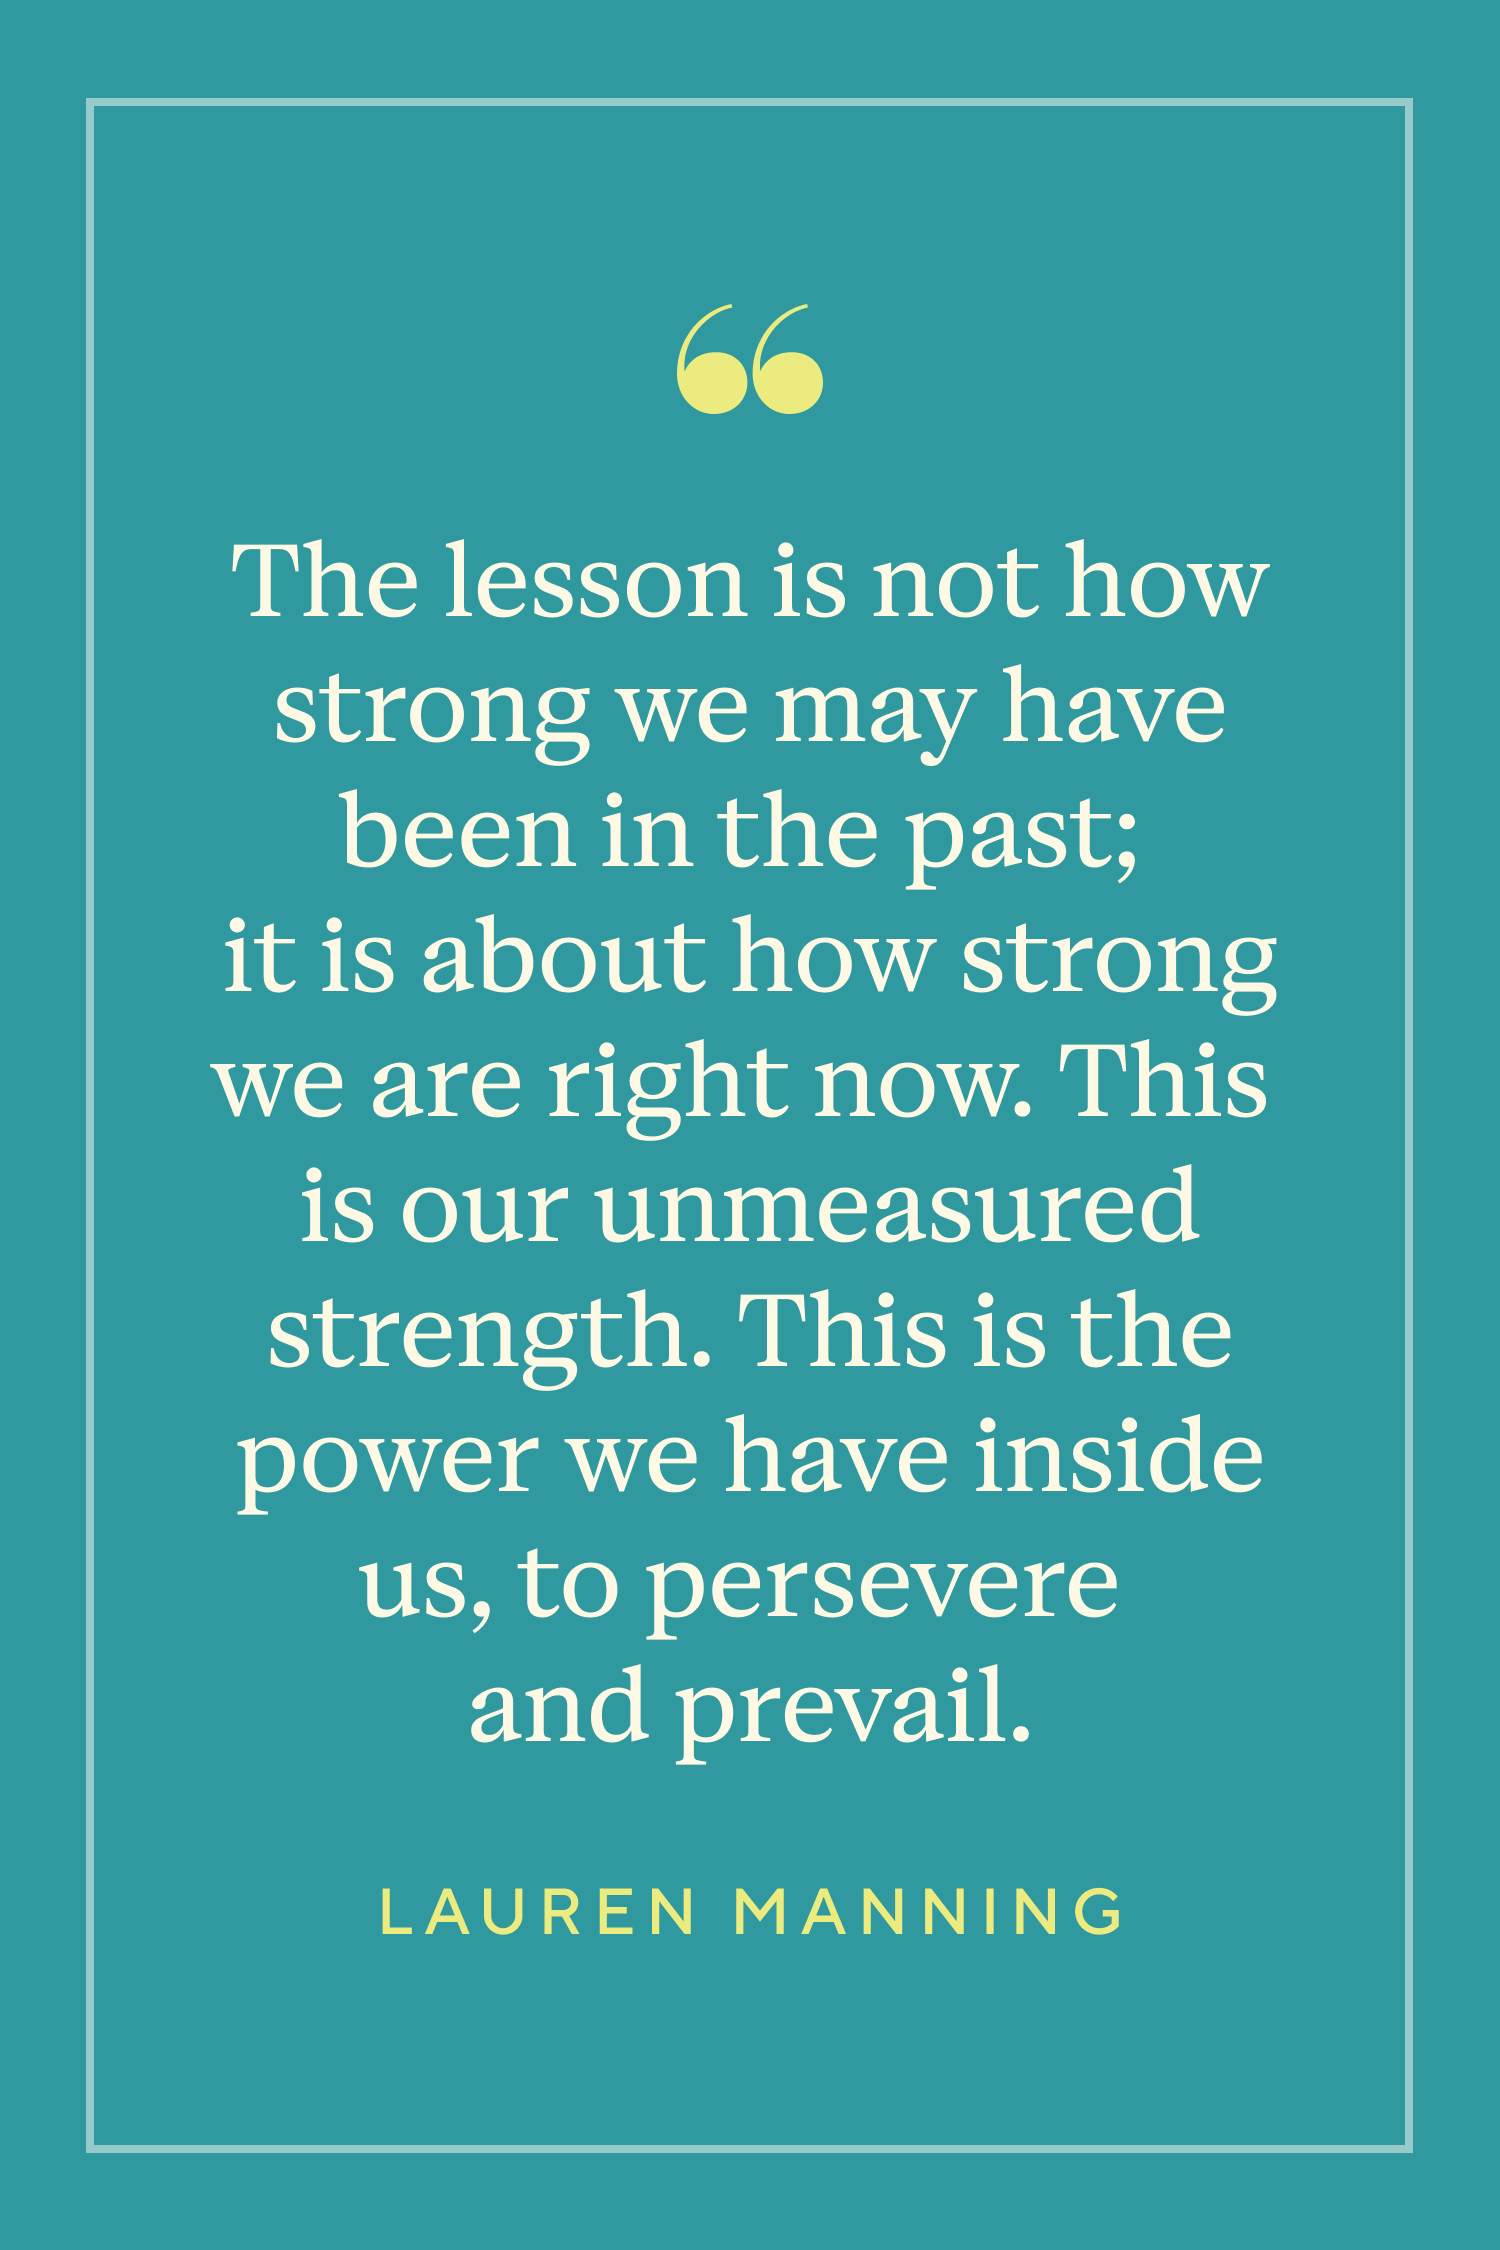 inspirational quotes about hope and strength